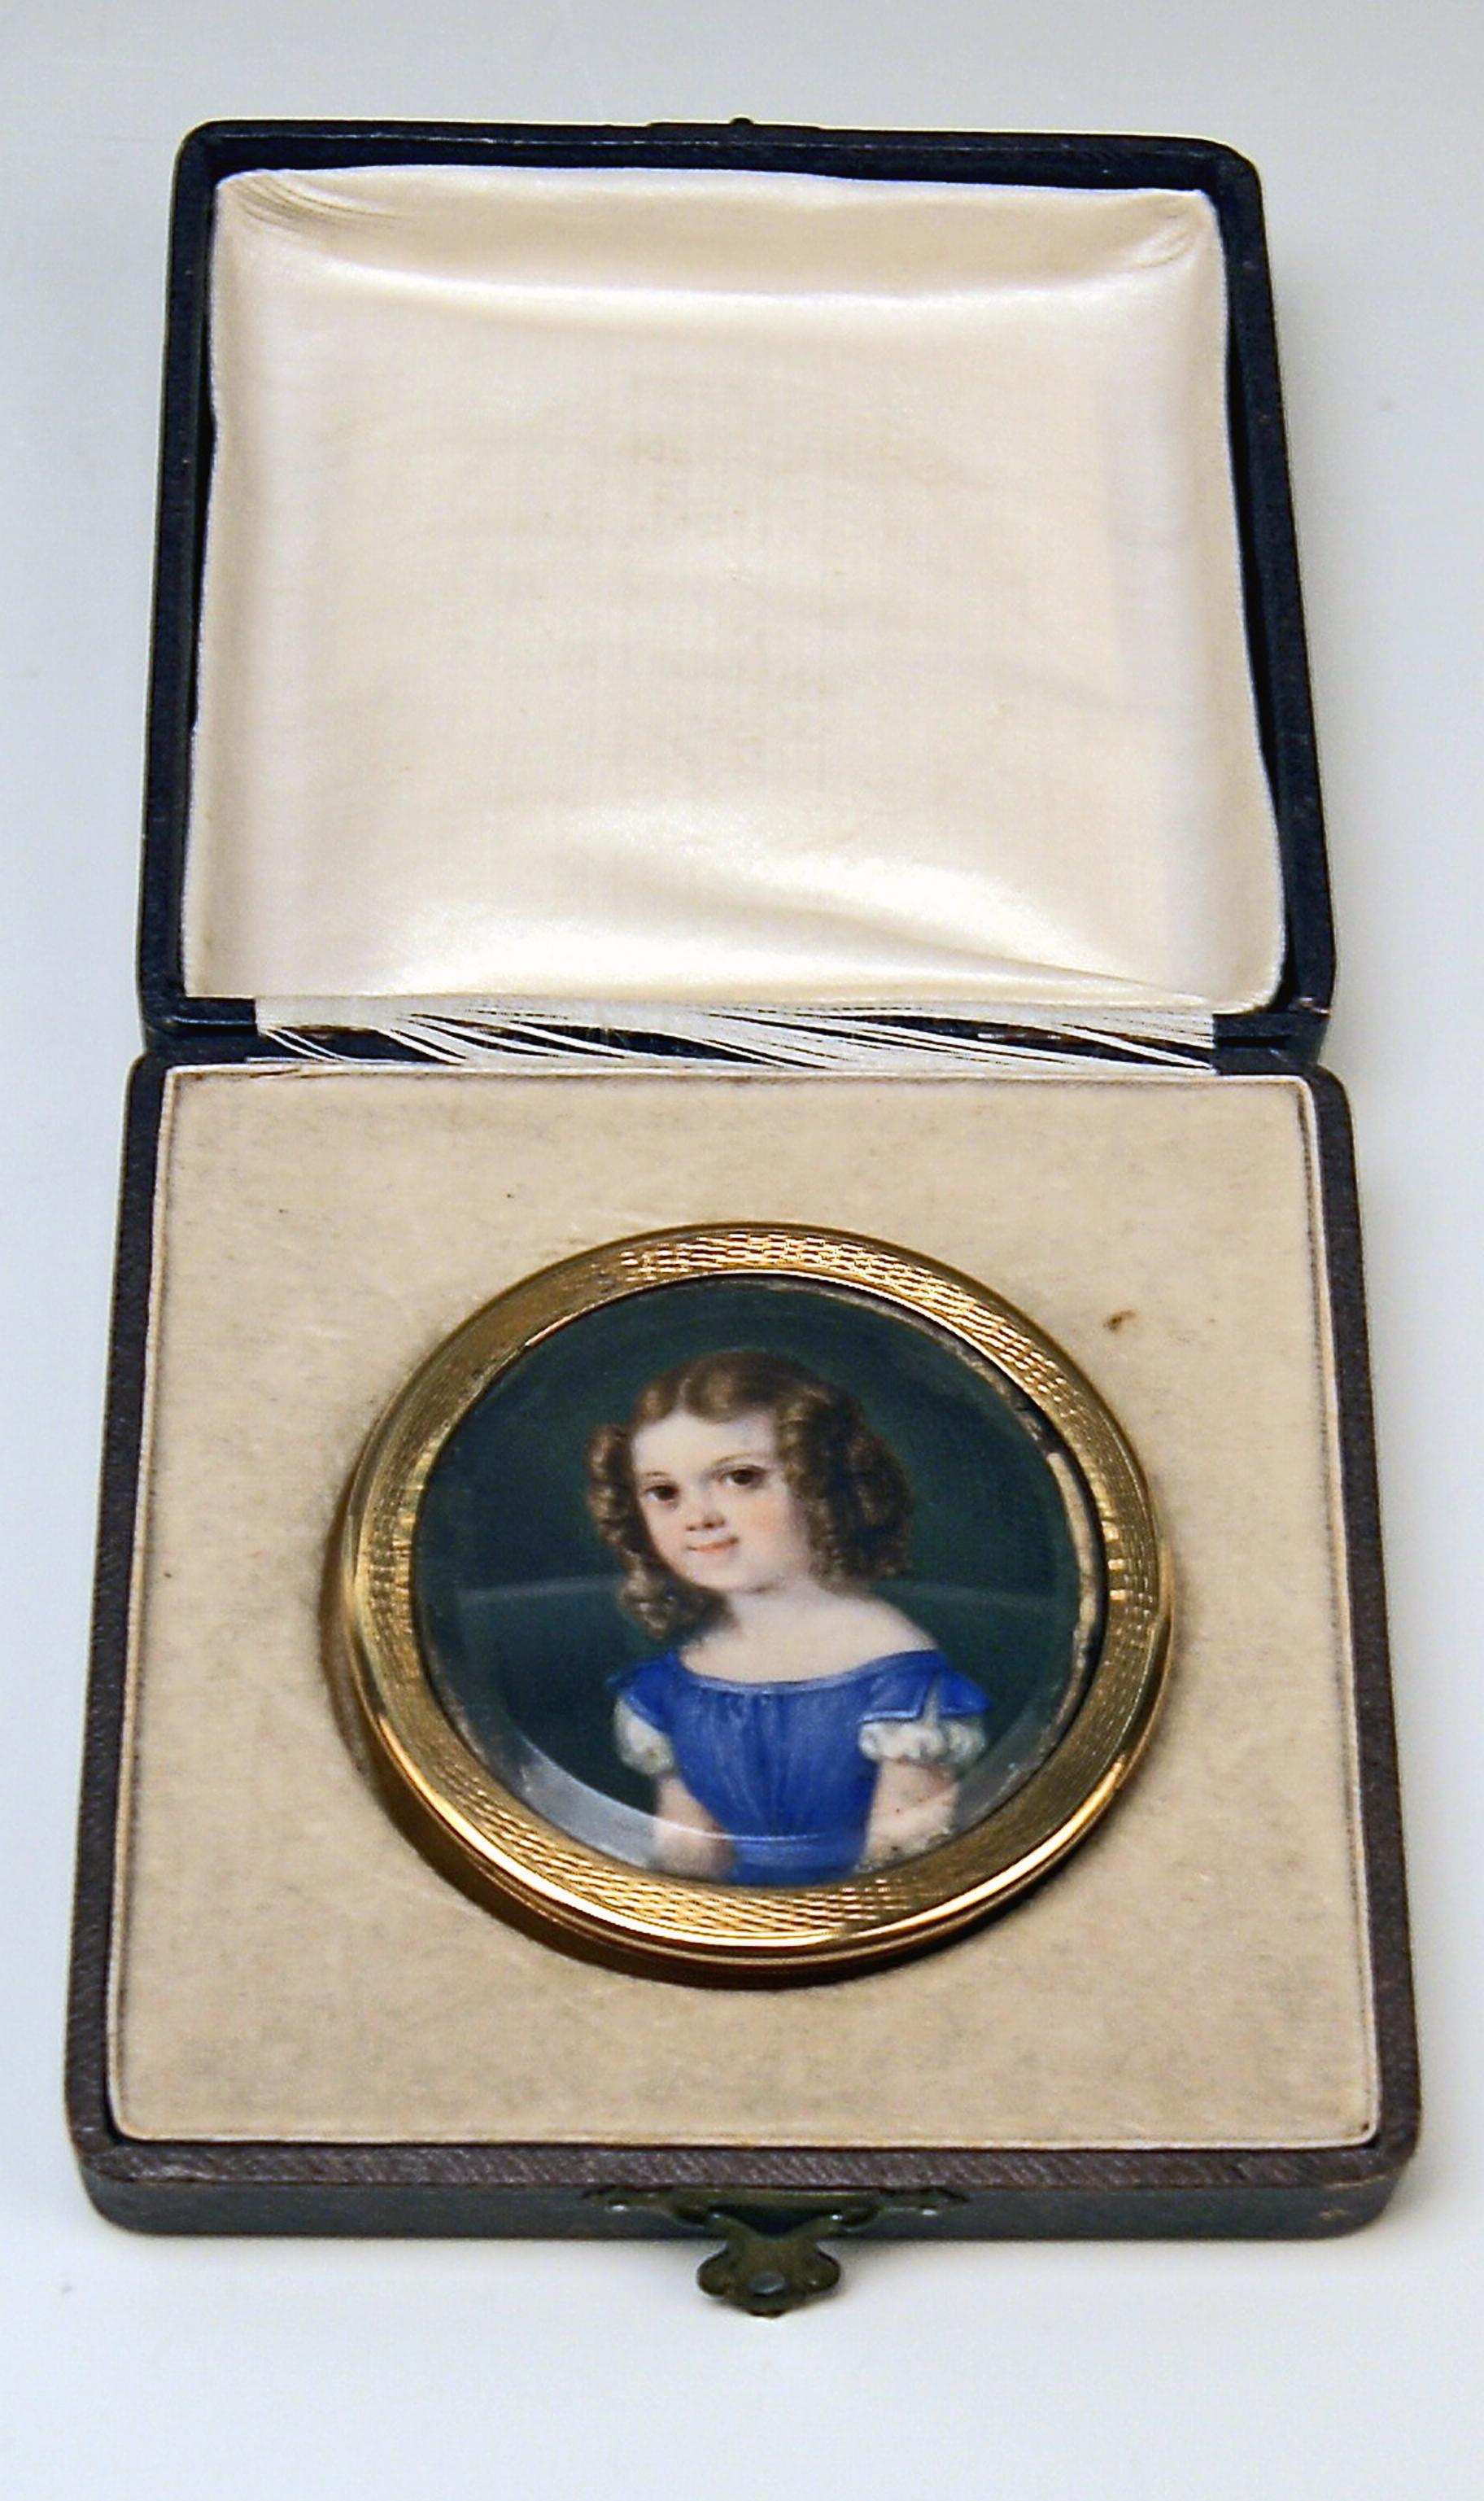 Golden  biedermeier round box with lovely portrait of a little girl.
Vienna / Austria, made 1828

Finest golden item of best manufacturing quality!

Specifications:
The lid of round golden box is covered with most lovely painting (protected by